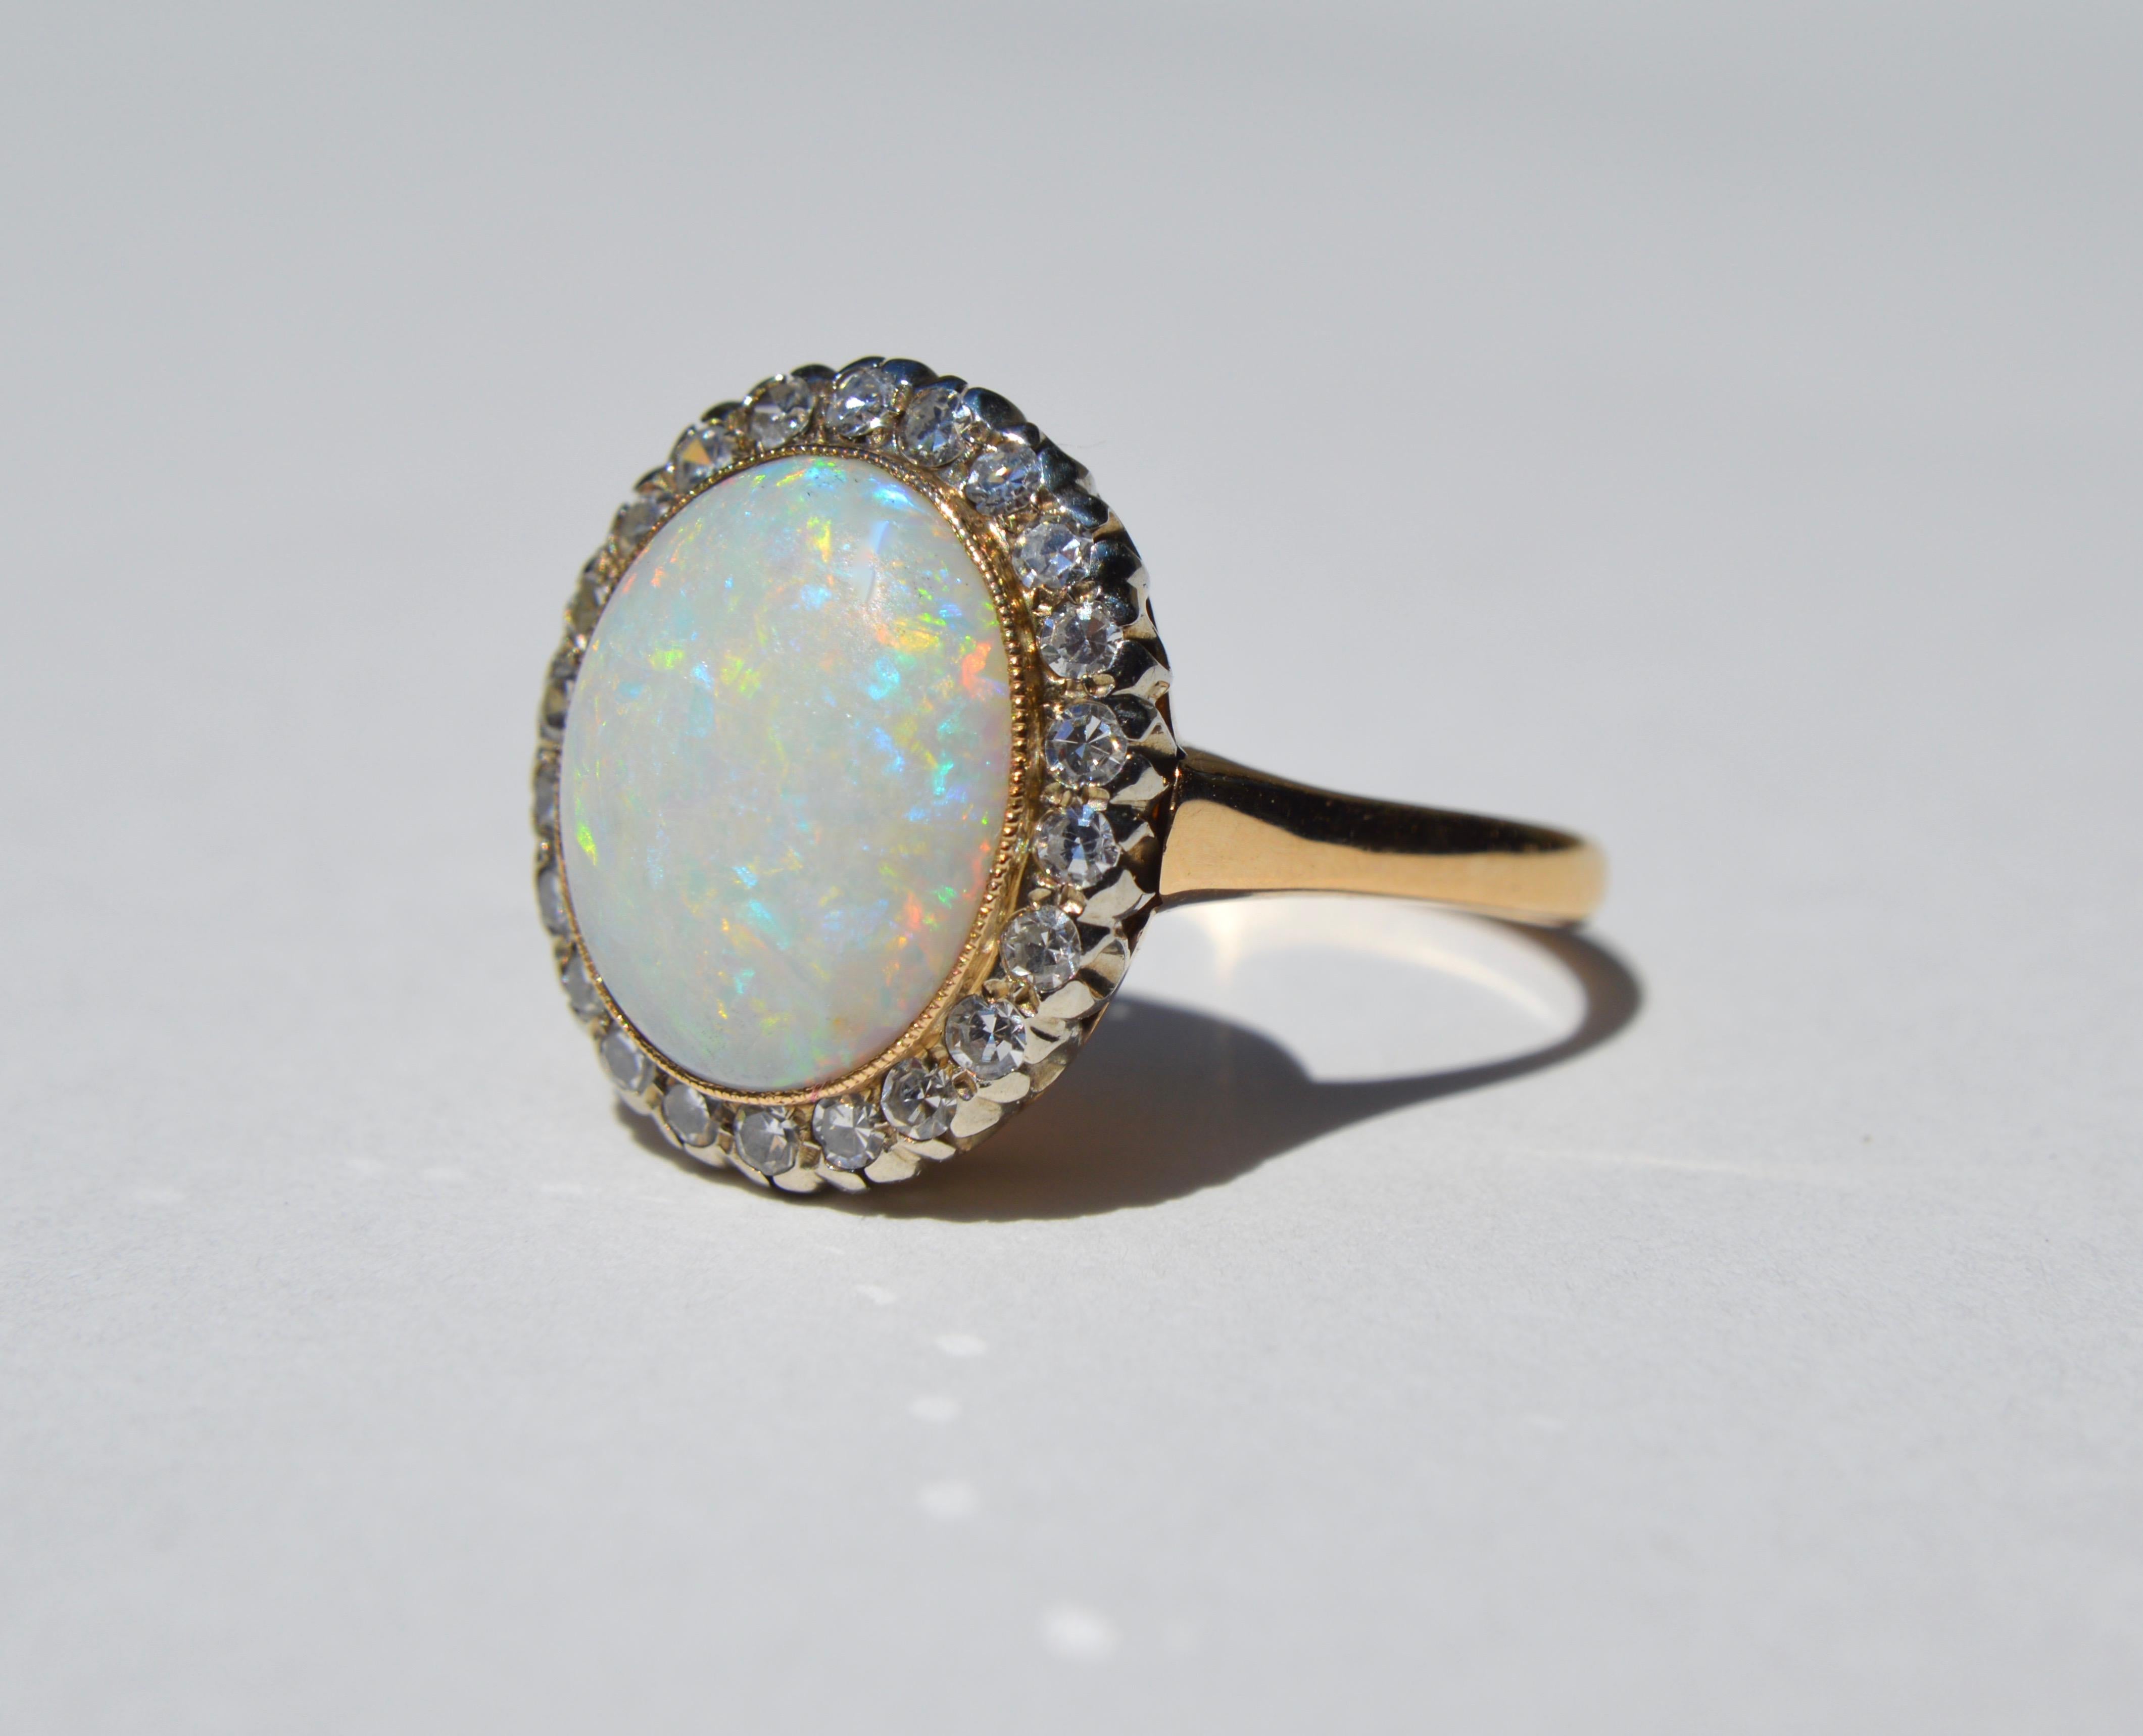 Beautiful Art Deco era circa 1920s fiery Australian opal with old European cut diamond halo. 14K yellow gold. Size 10. Can be resized by a jeweler. Opal cabochon measures 14x10mm, 6 carats. Stamped as solid 14K. In very good condition. The opal is